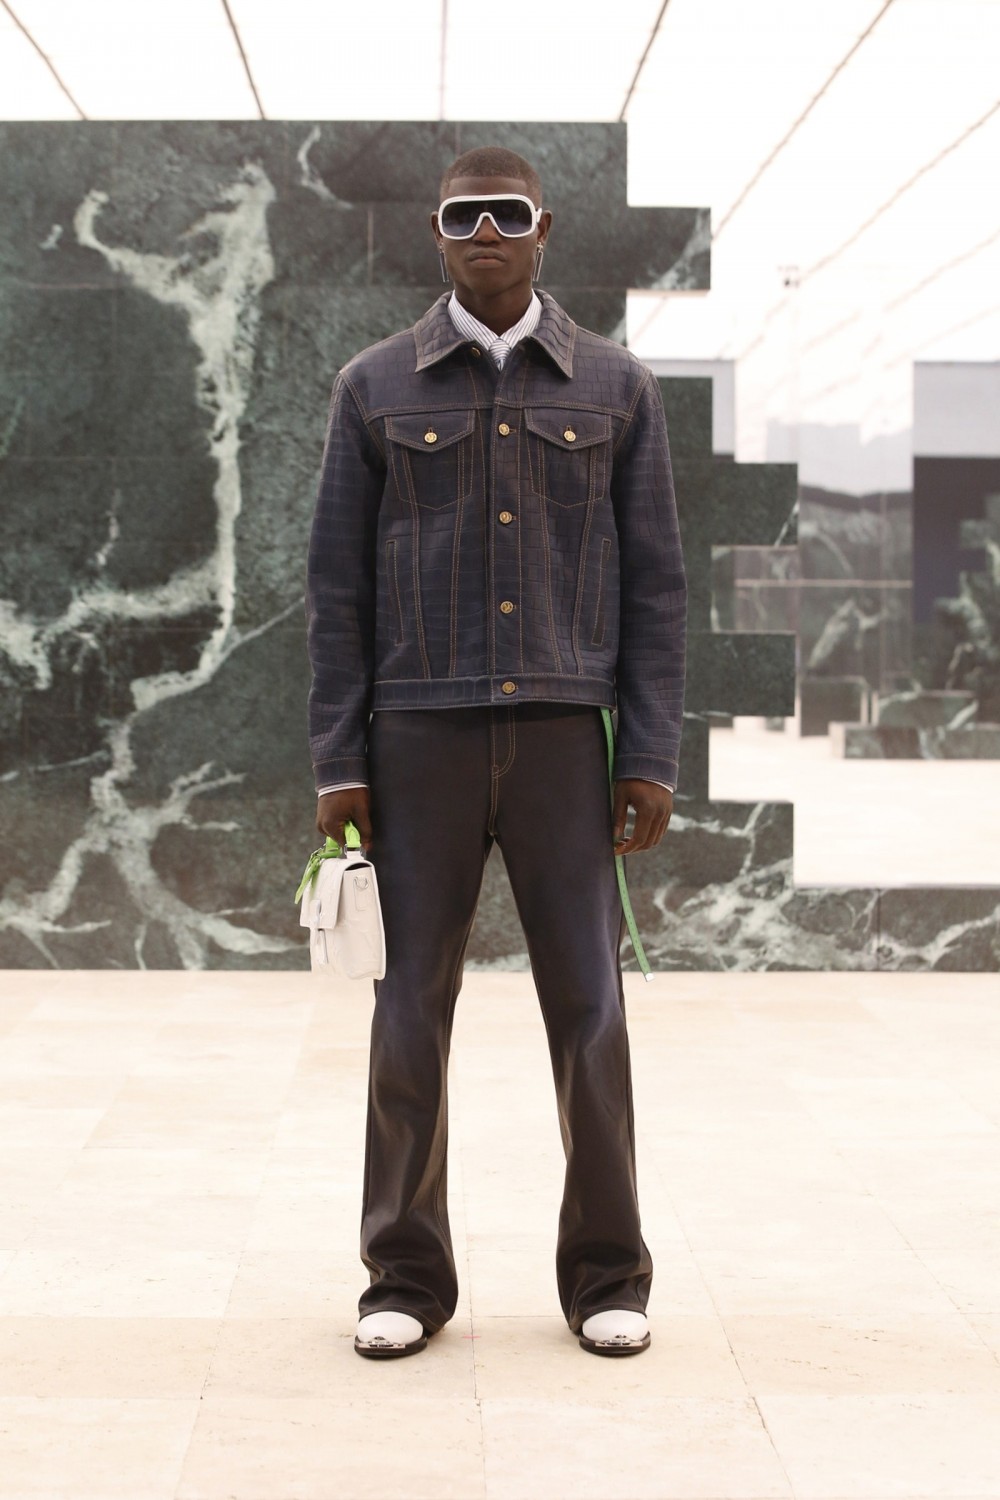 I loved the indigo leather alldenimesque look. It was such a highfashion take on the Canadian tuxedo.nbsp